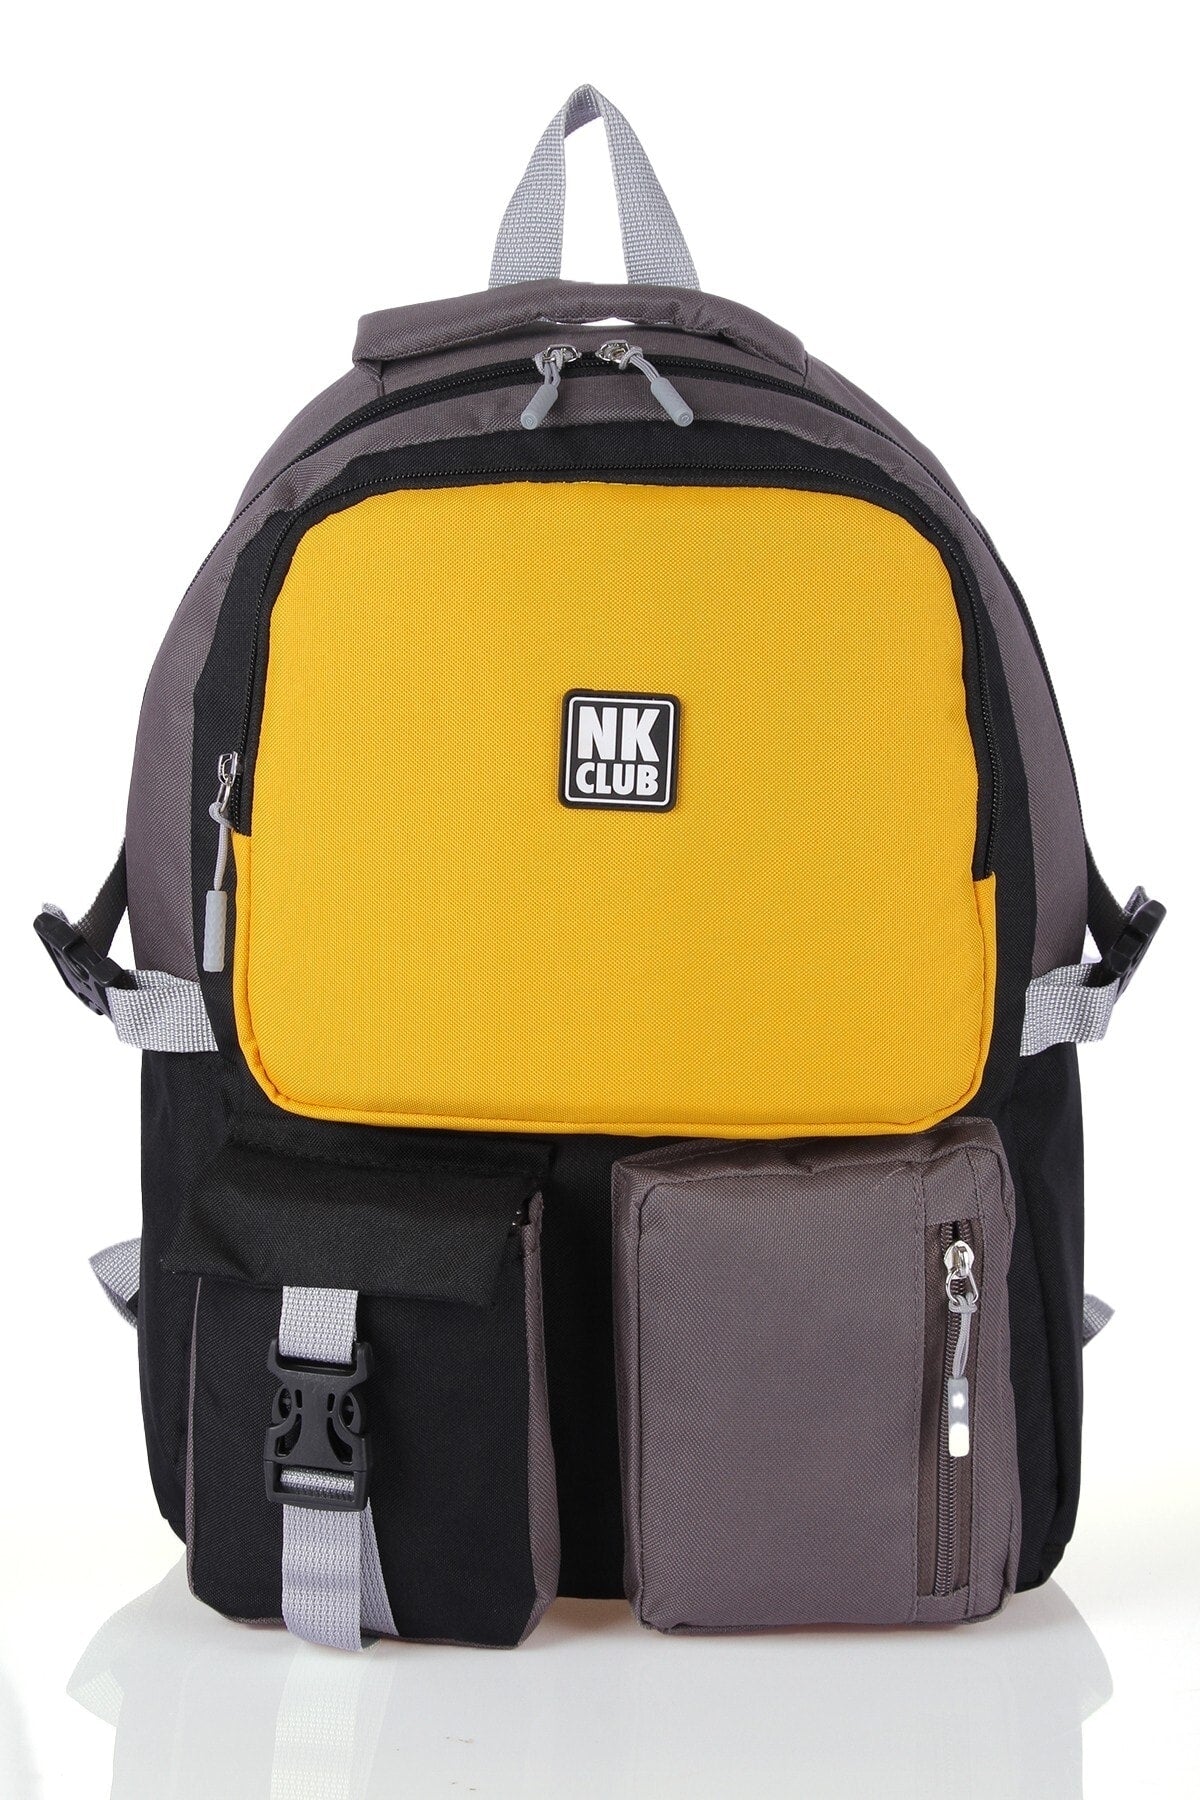 Hkn 9012 Primary School Backpack School Bag Multi Compartment Mustard